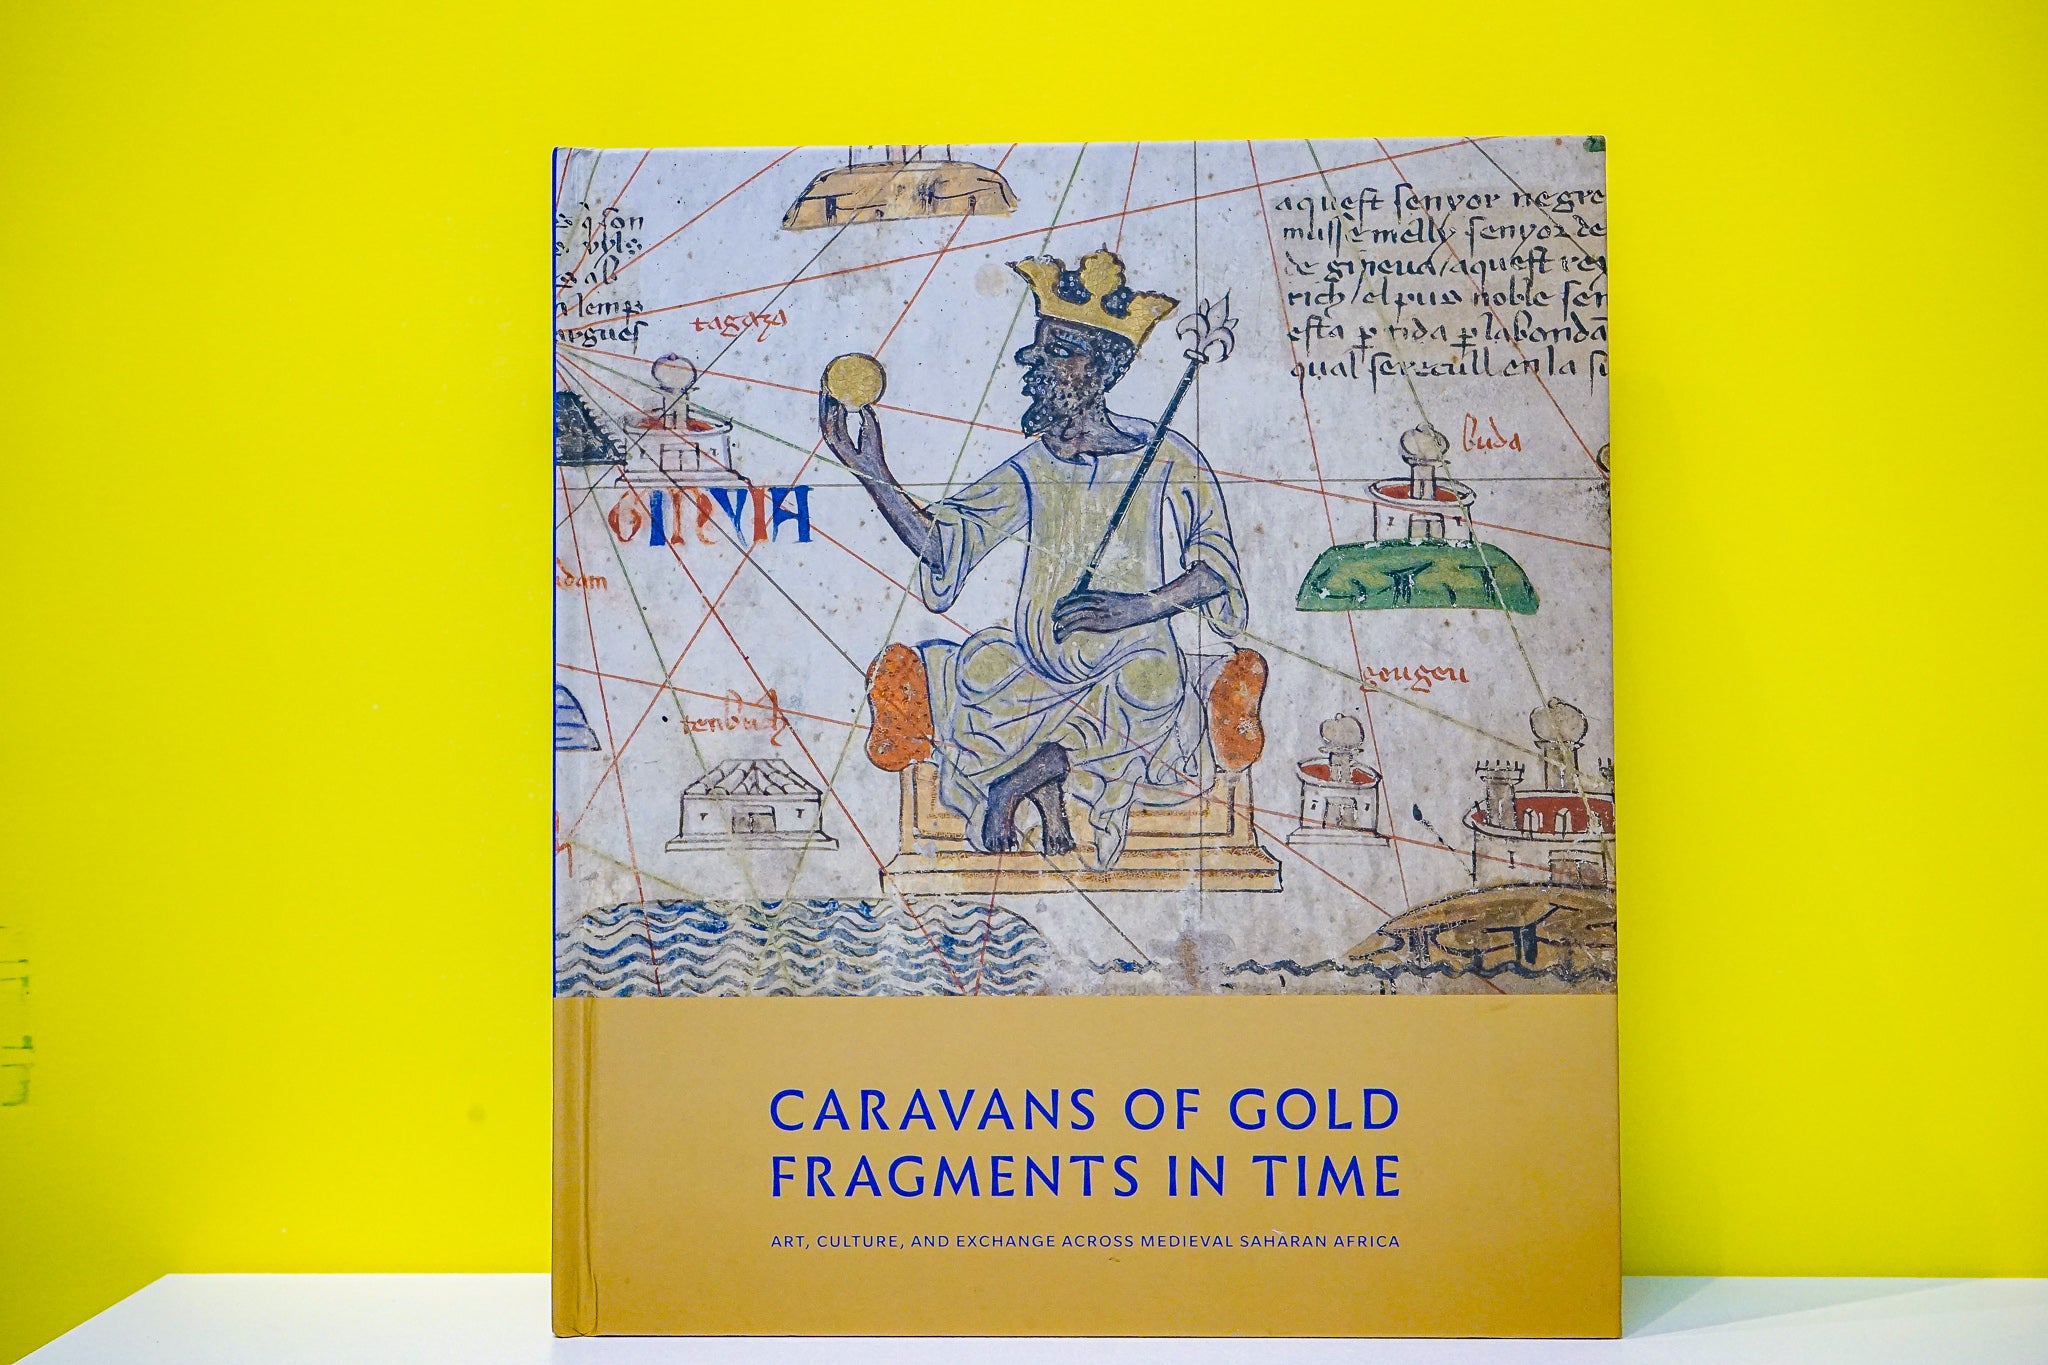 Caravans of Gold, Fragments in Time: Art, Culture, and Exchange across Medieval Saharan Africa